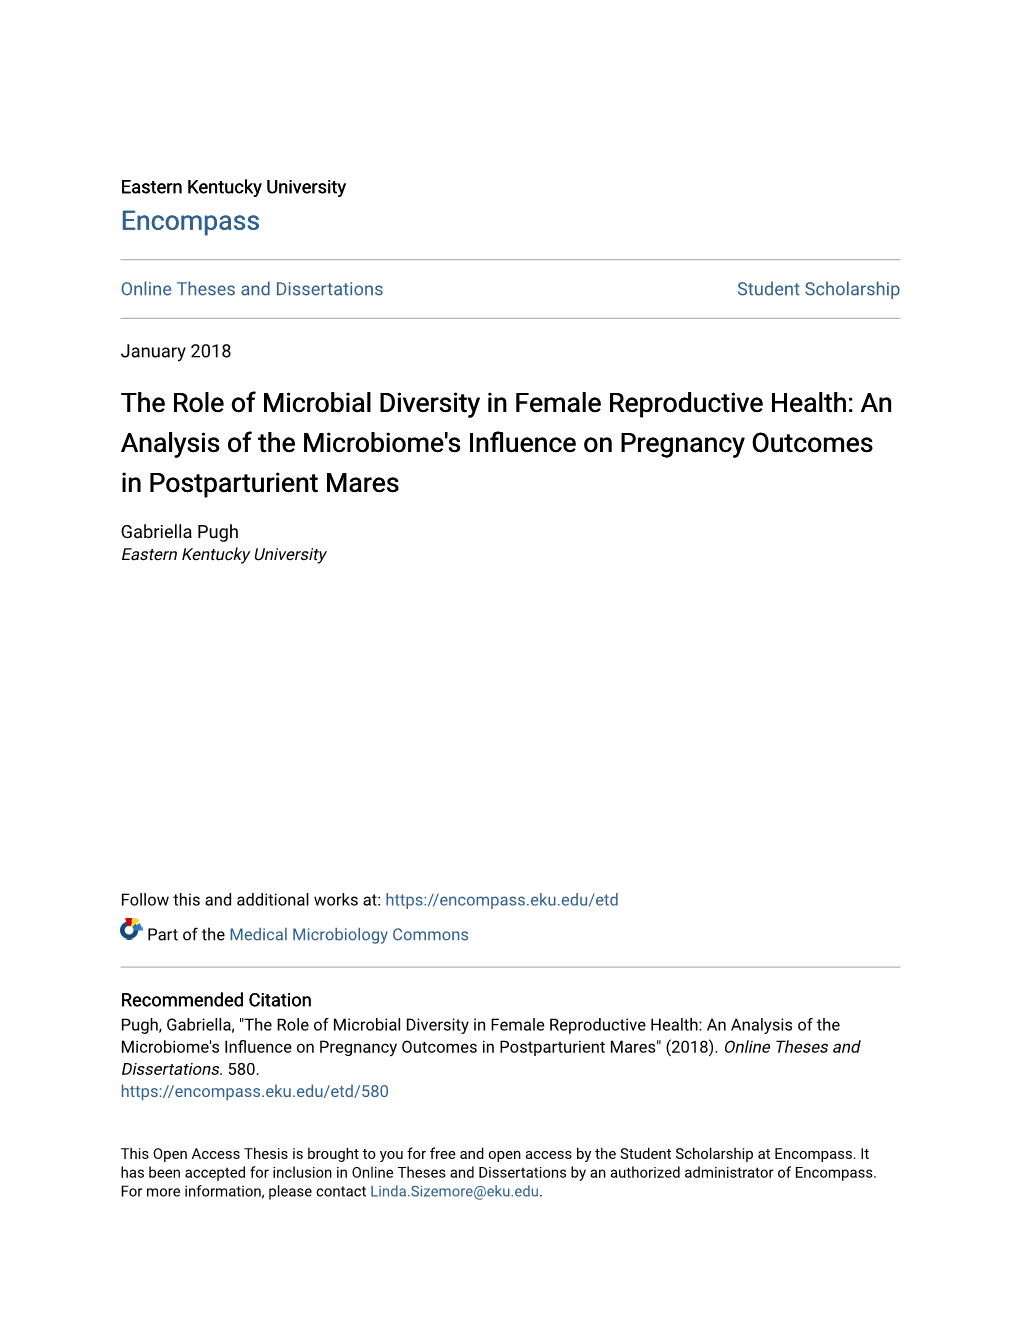 The Role of Microbial Diversity in Female Reproductive Health: an Analysis of the Microbiome's Influence on Pregnancy Outcomes in Postparturient Mares